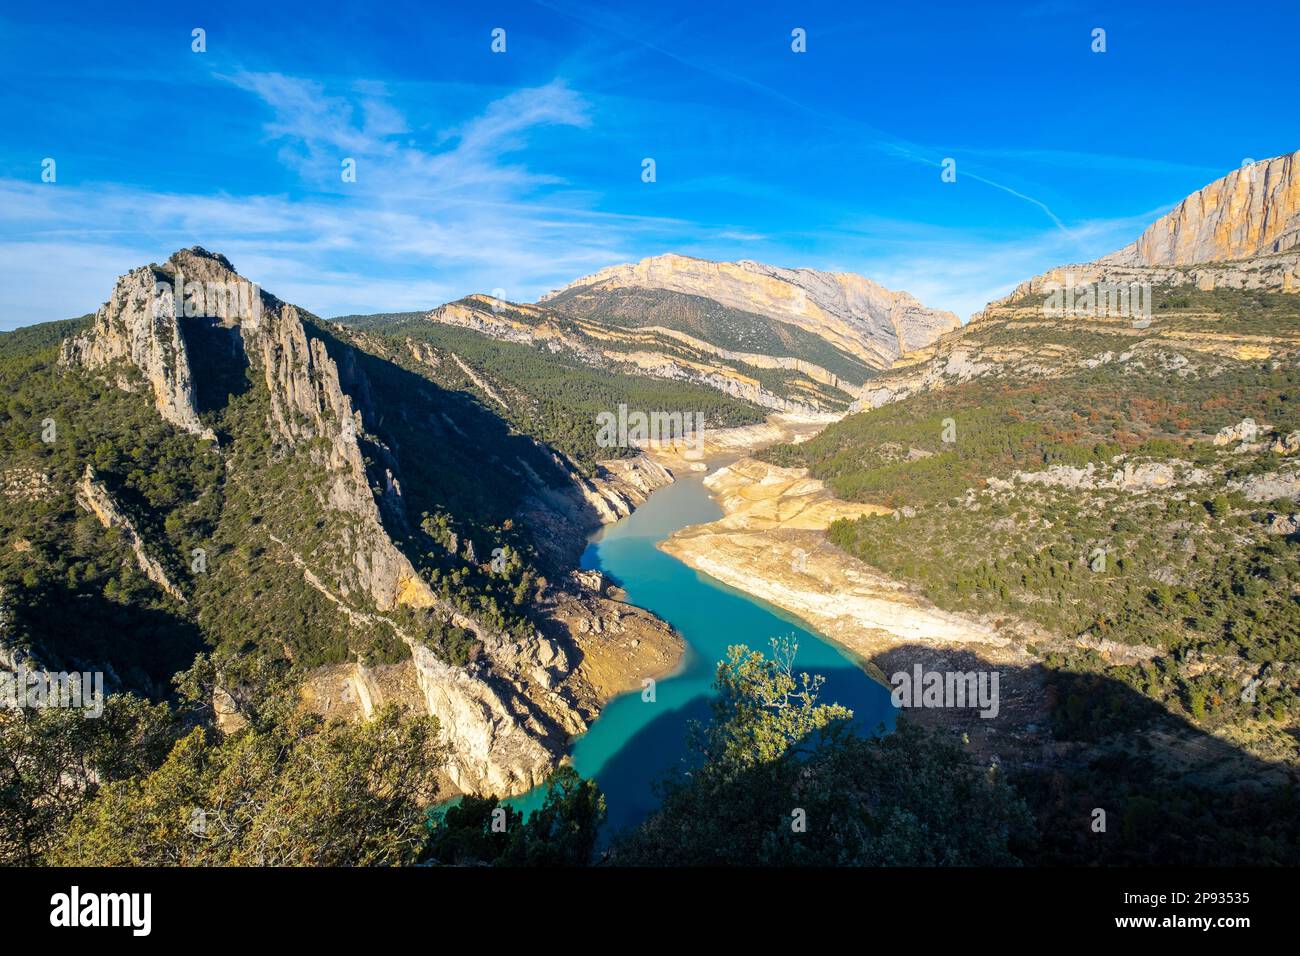 Panoramic of the Noguera Ribagorzana river and the Montrebei gorge in the Protected Natural Area of Montsec in the province of Lleida in Catalonia Spain Stock Photo